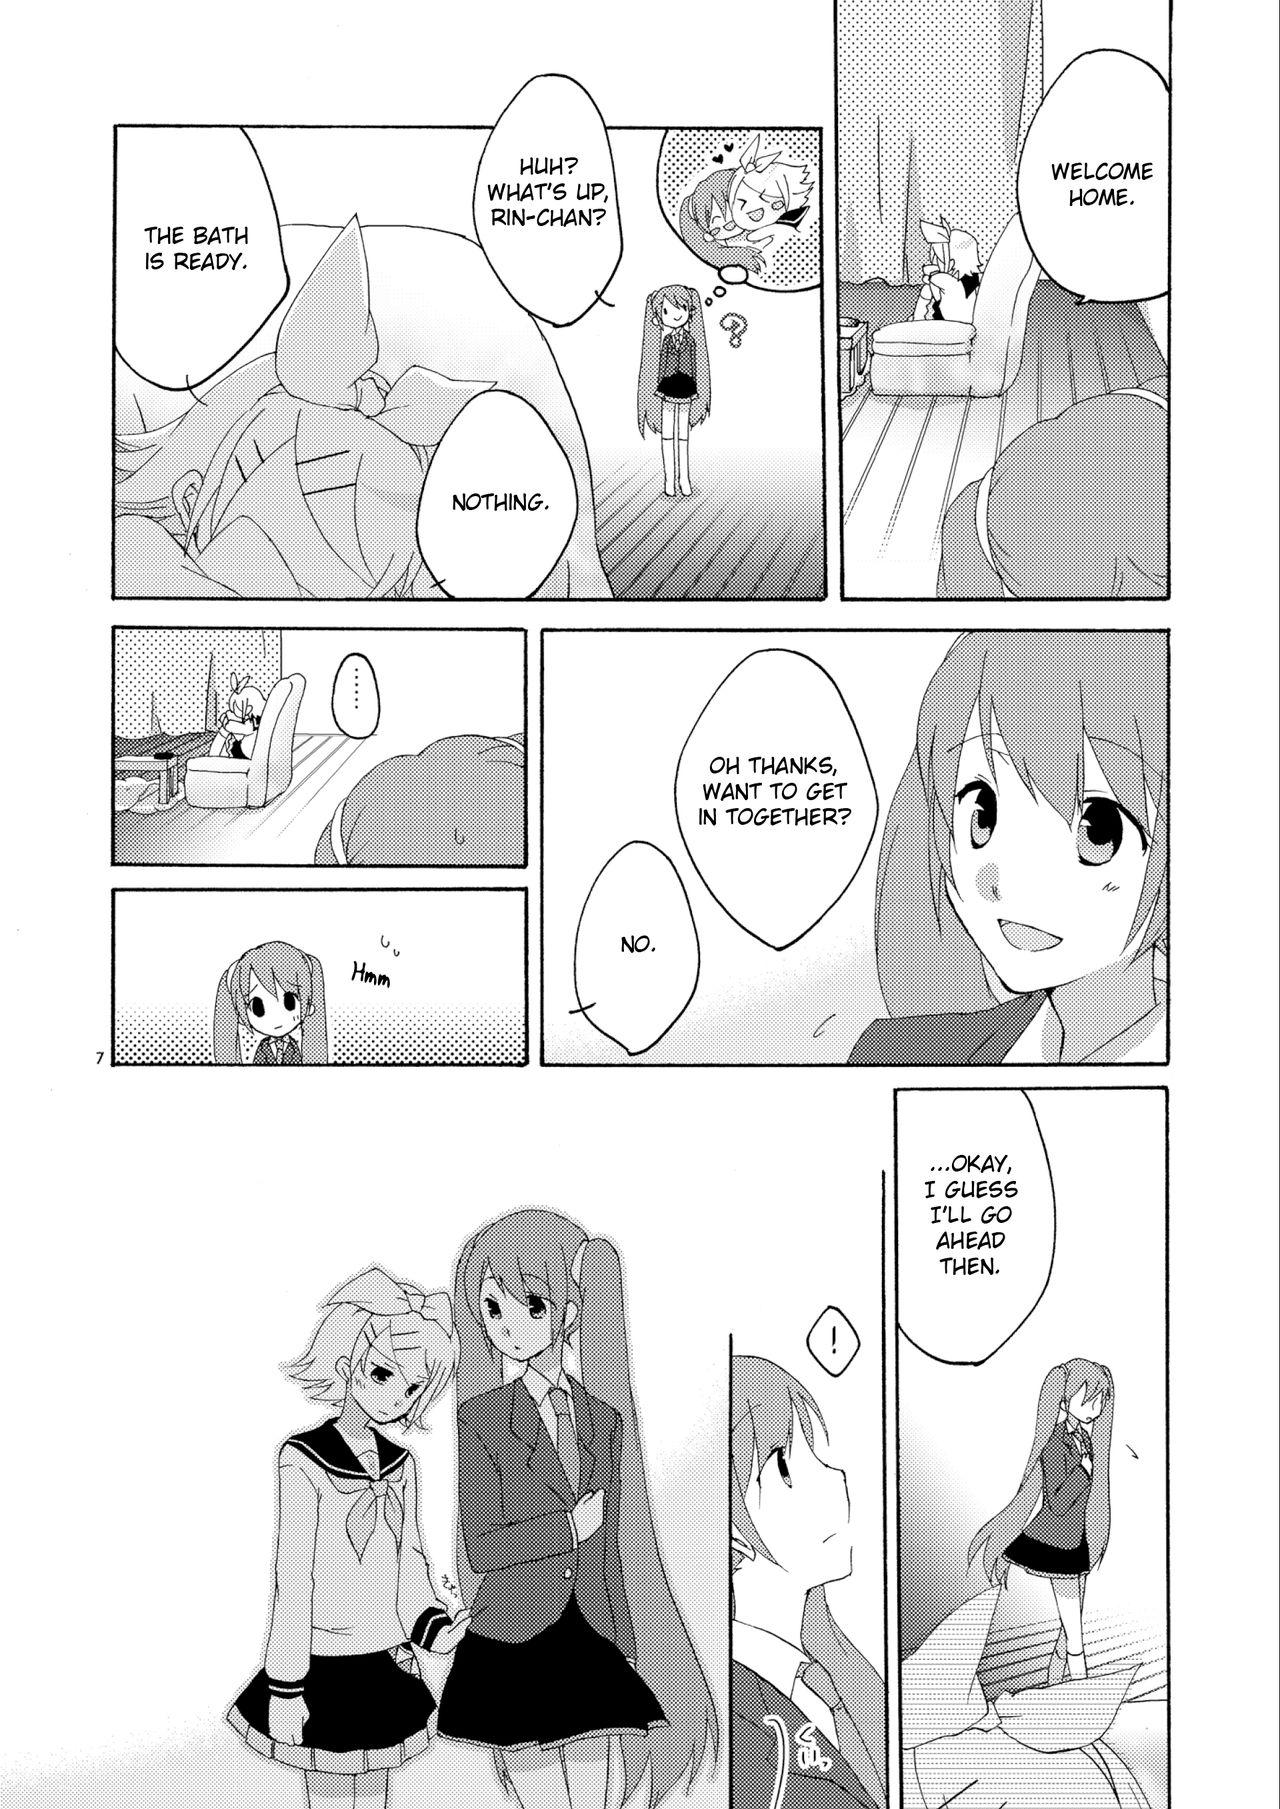 Sharing Hanny Box - Vocaloid Students - Page 6